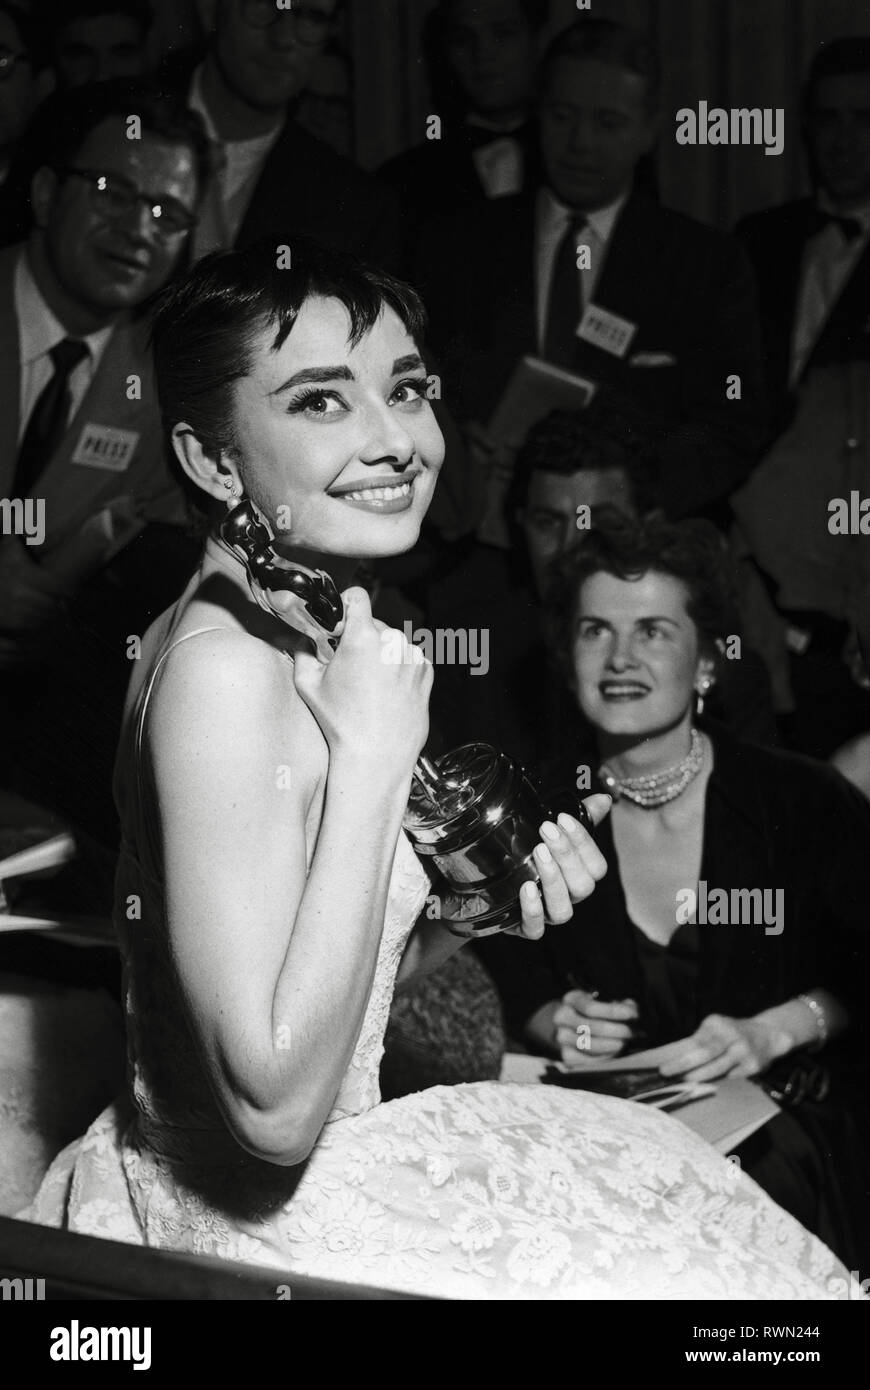 Audrey Hepburn wearing a white floral dress by Hubert de Givenchy at the 26th Annual Academy Awards held at the NBC Century Theatre in New York City on March 25, 1954. Hepburn won best actress for 'Roman Holiday'  File Reference # 33751 478THA Stock Photo